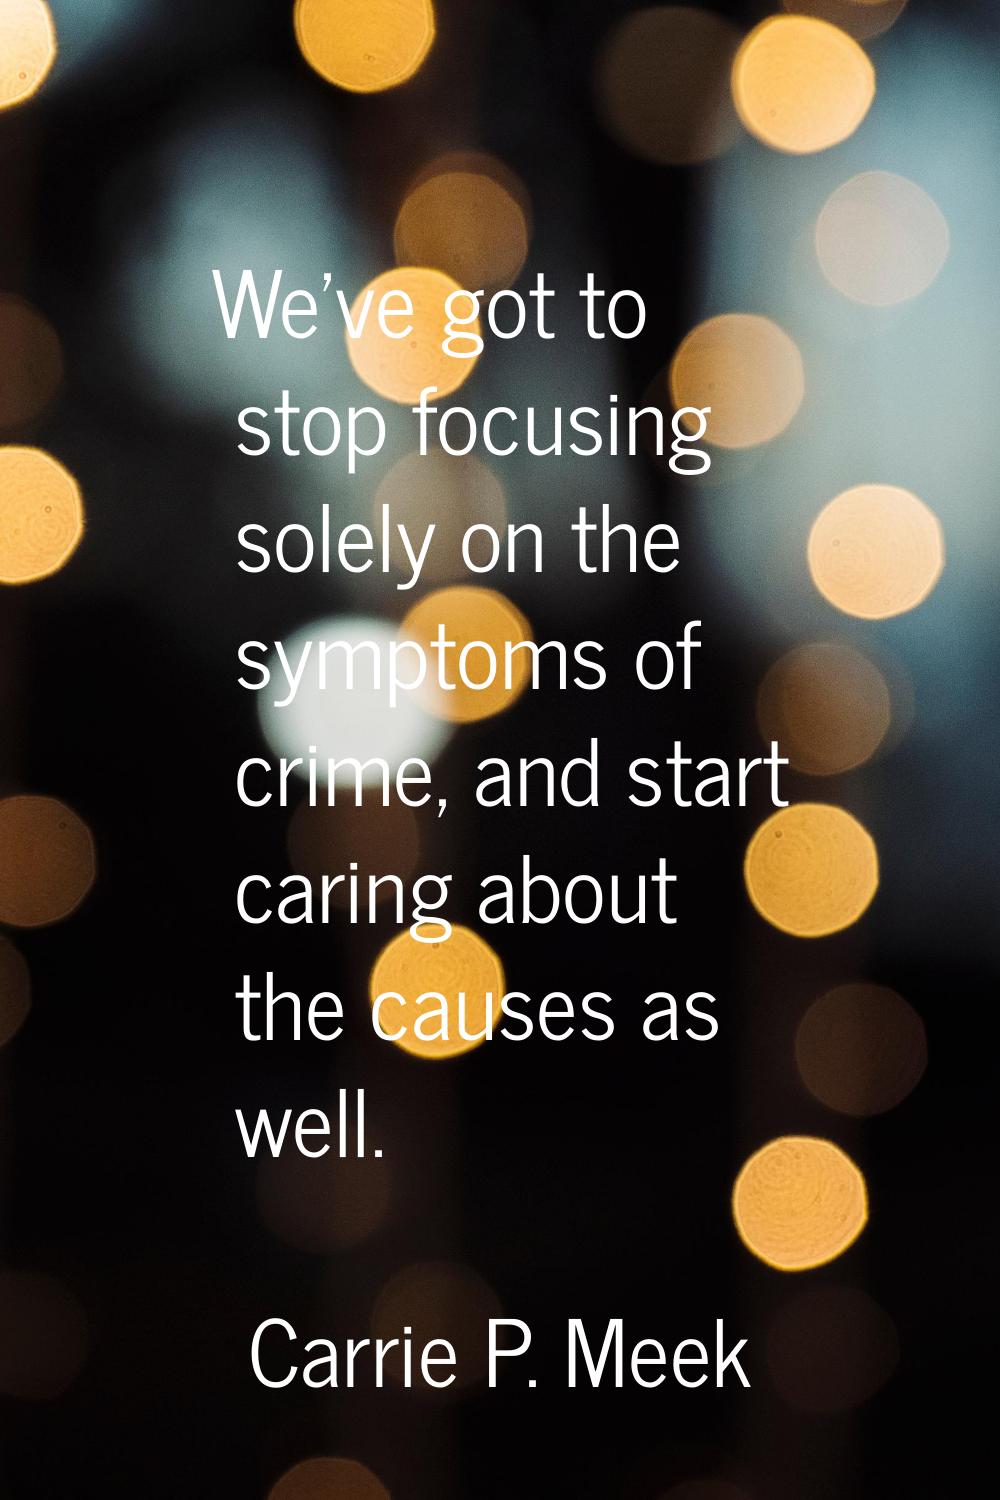 We've got to stop focusing solely on the symptoms of crime, and start caring about the causes as we